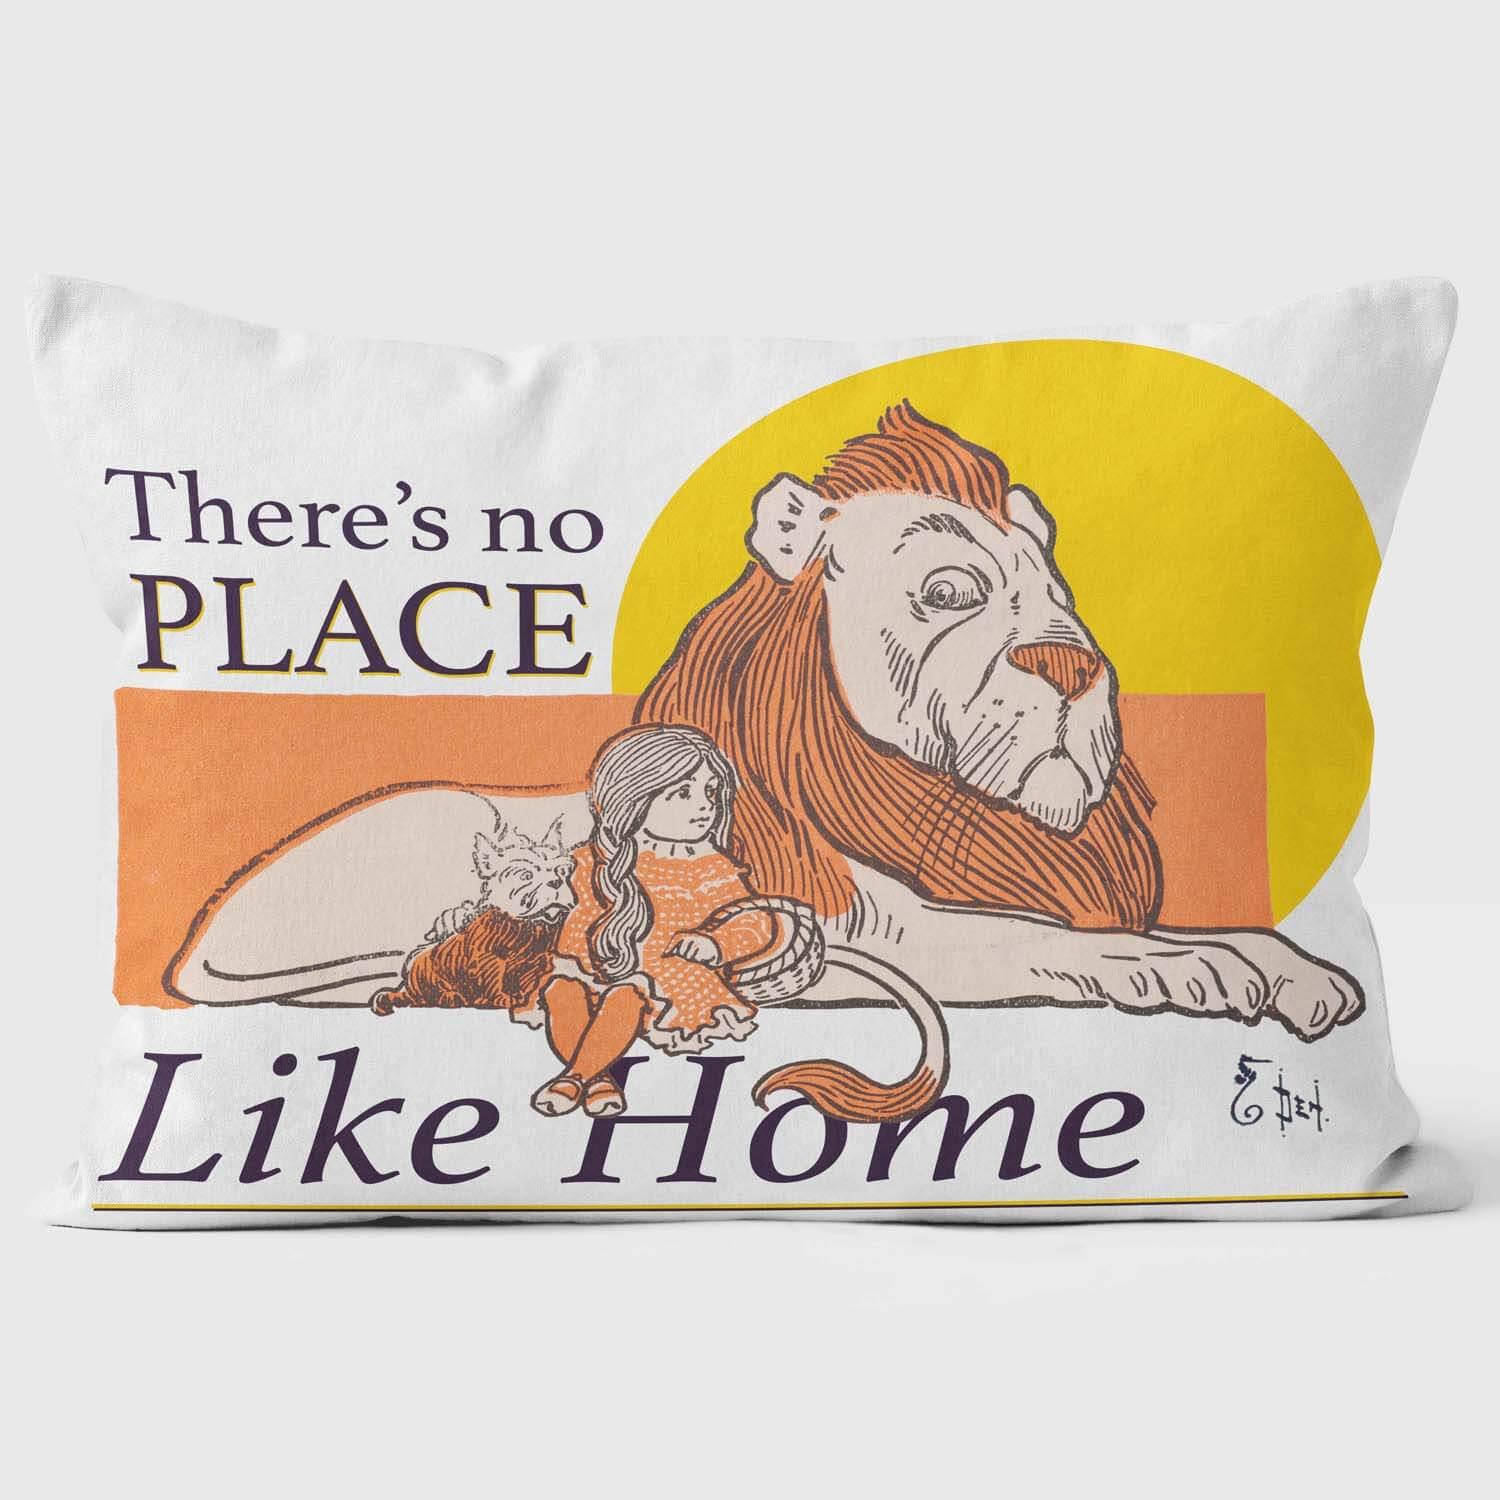 There Is No Place Like Home - The Wizard of Oz Cushion - Handmade Cushions UK - WeLoveCushions